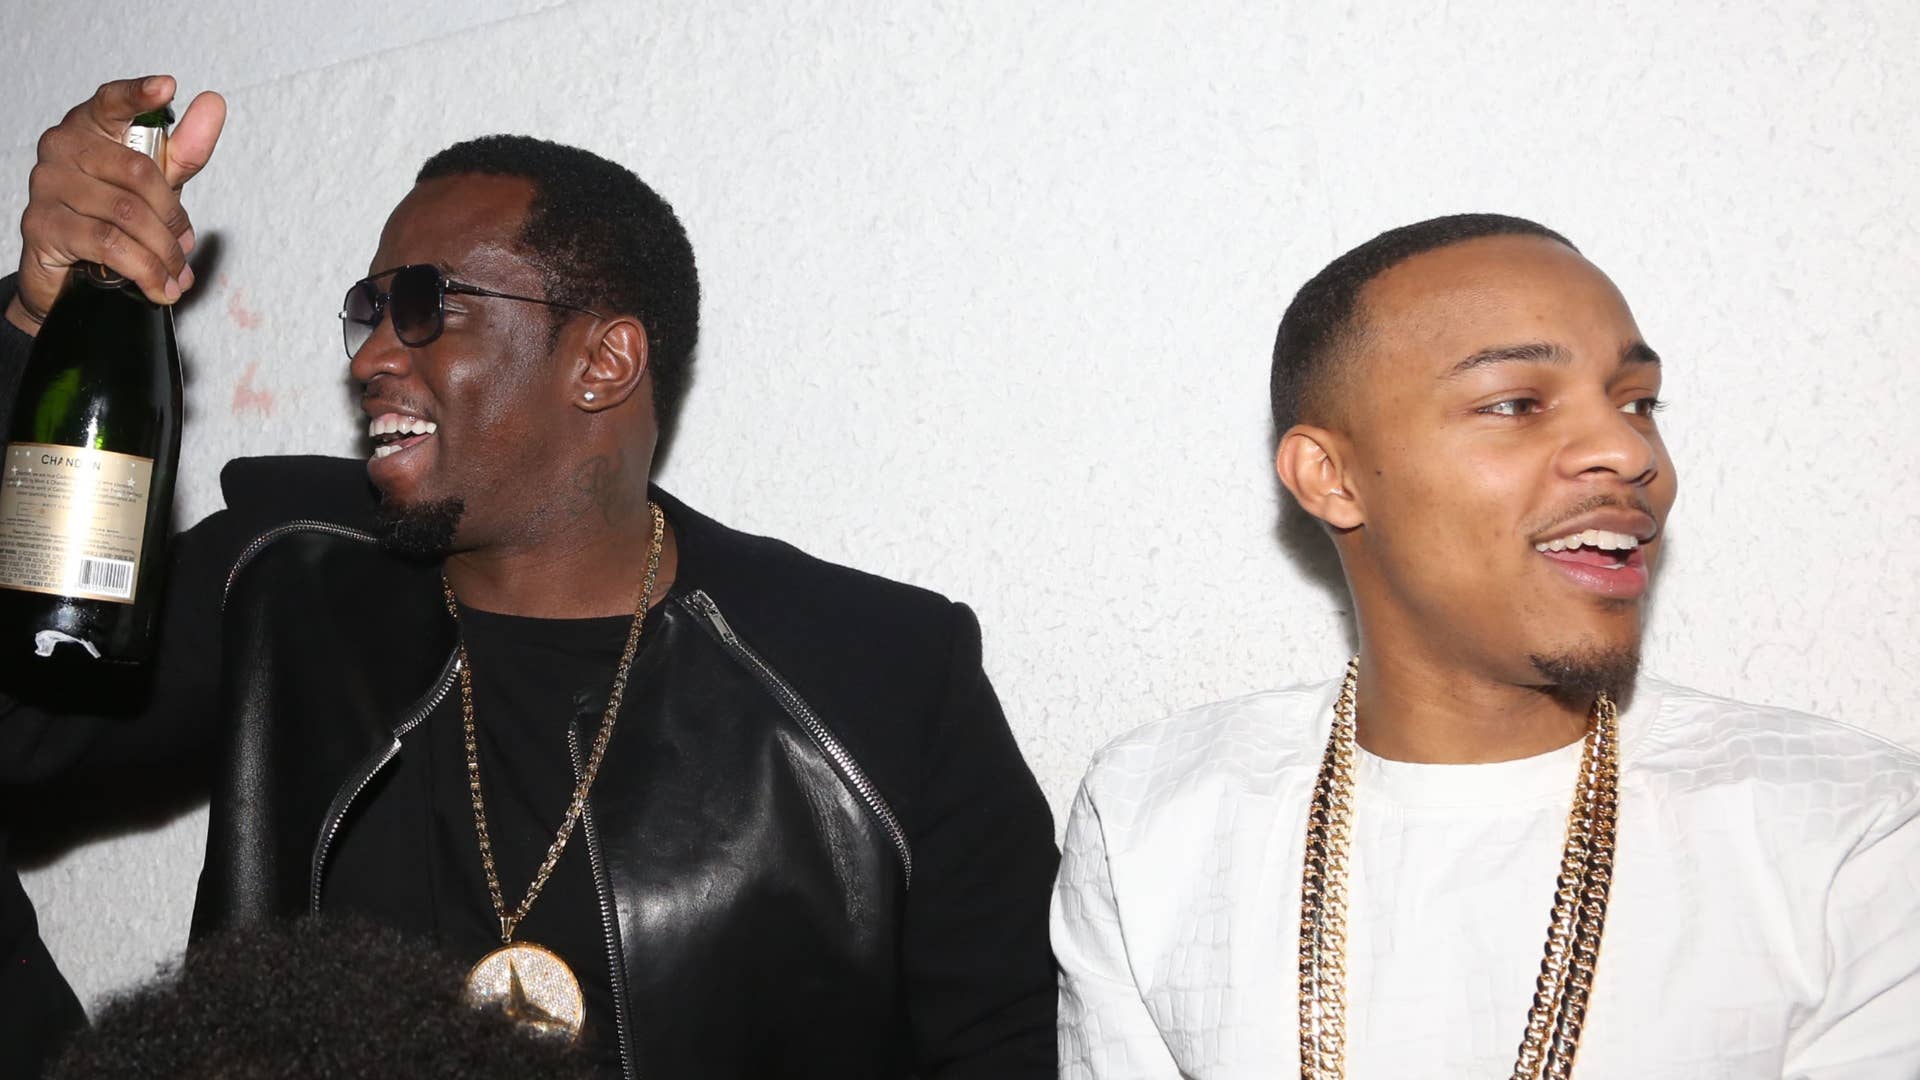 Bow Wow Speaks On Ex Joie Chavis Hanging Out With Diddy: 'Some Things Are Off Limits'